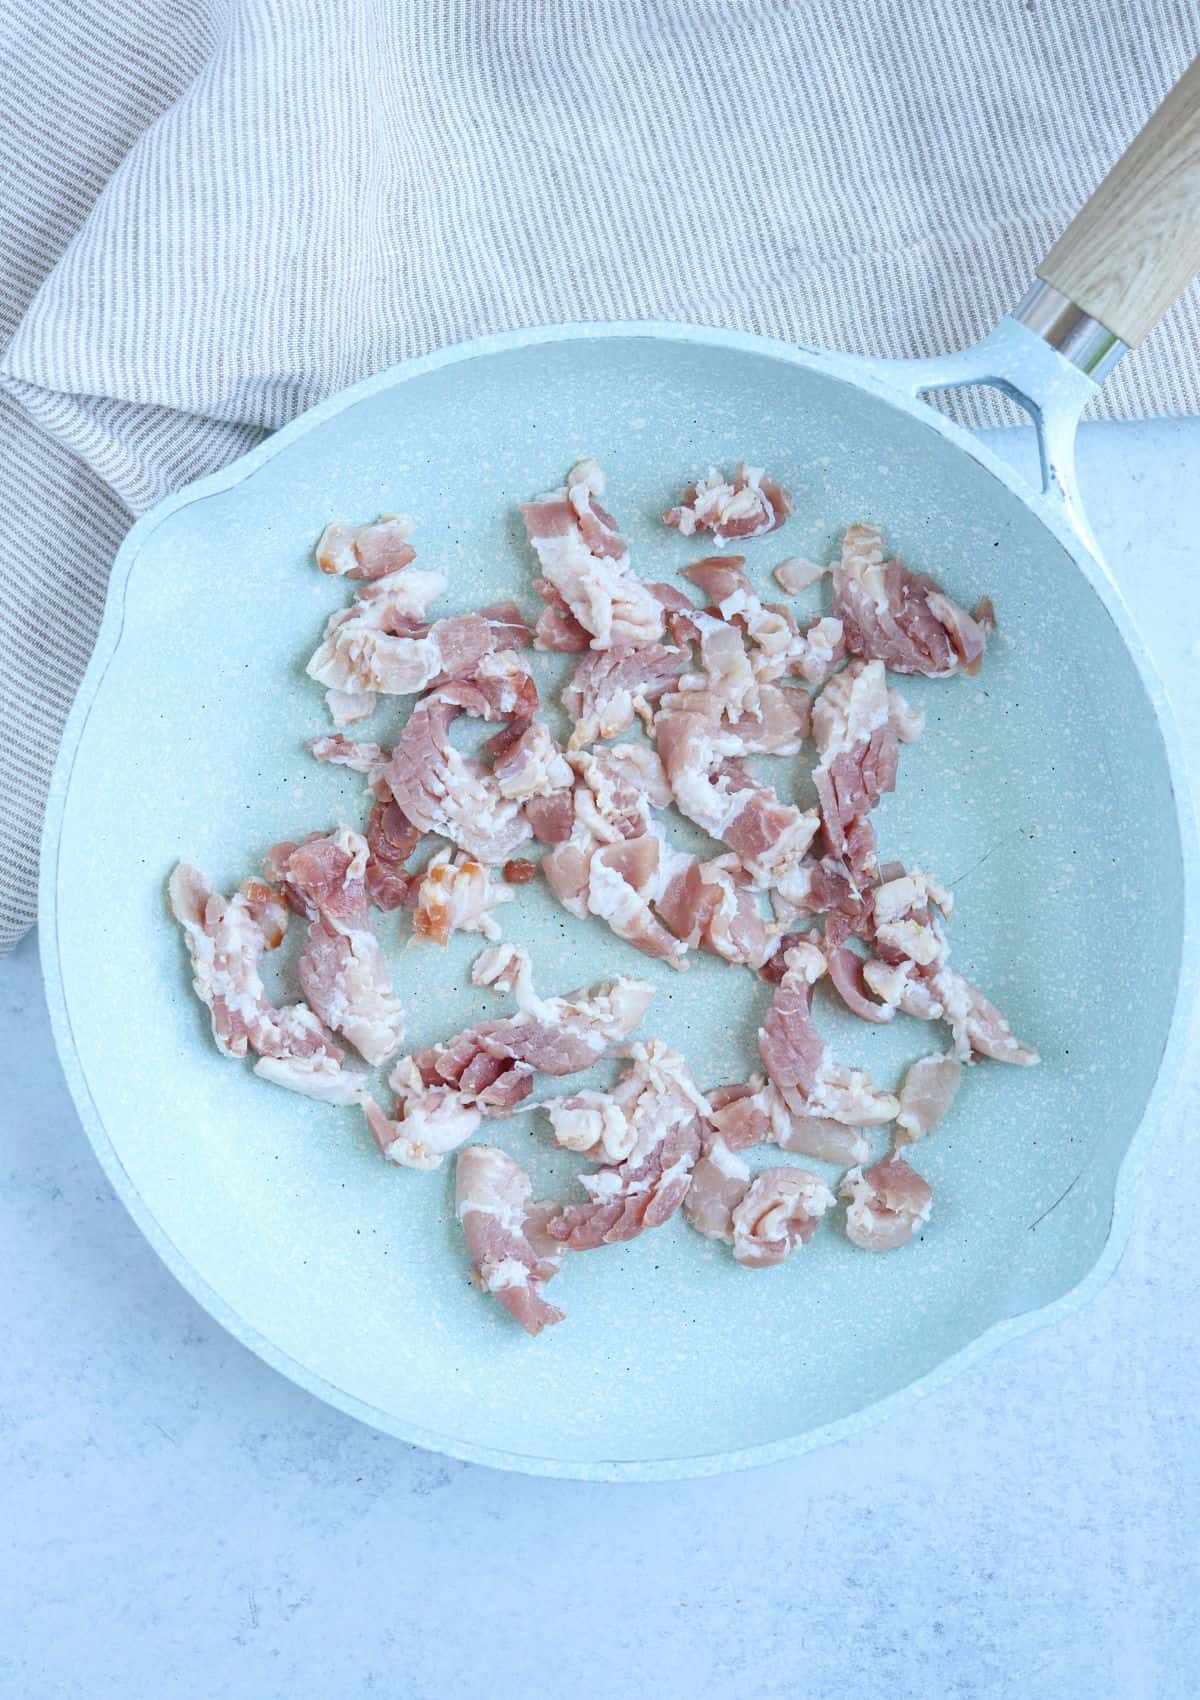 raw bacon bits before cooking in a light blue skillet.